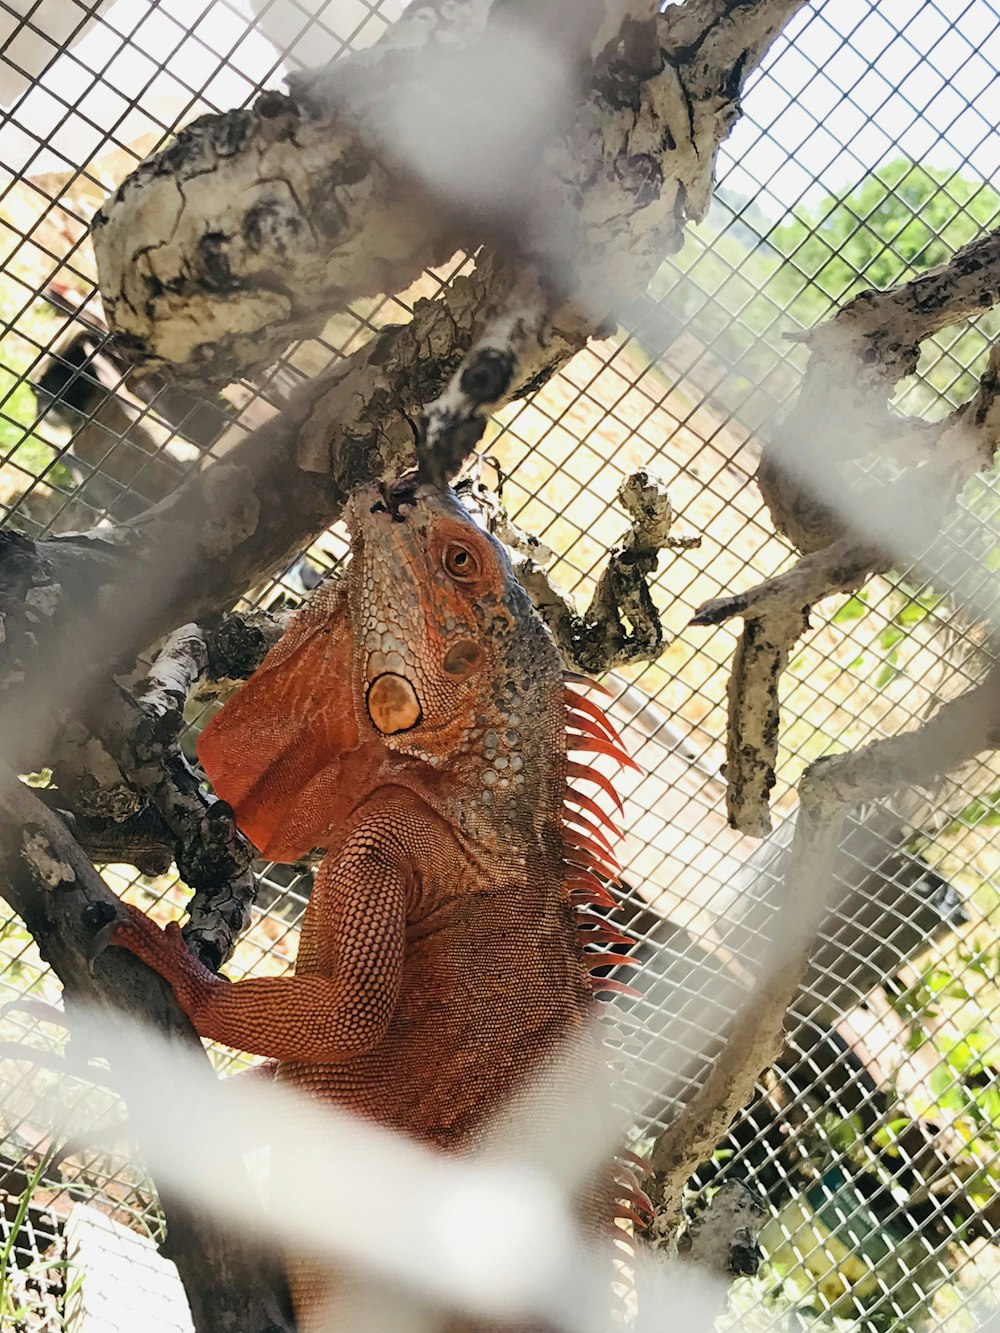 a large red lizard in a caged area